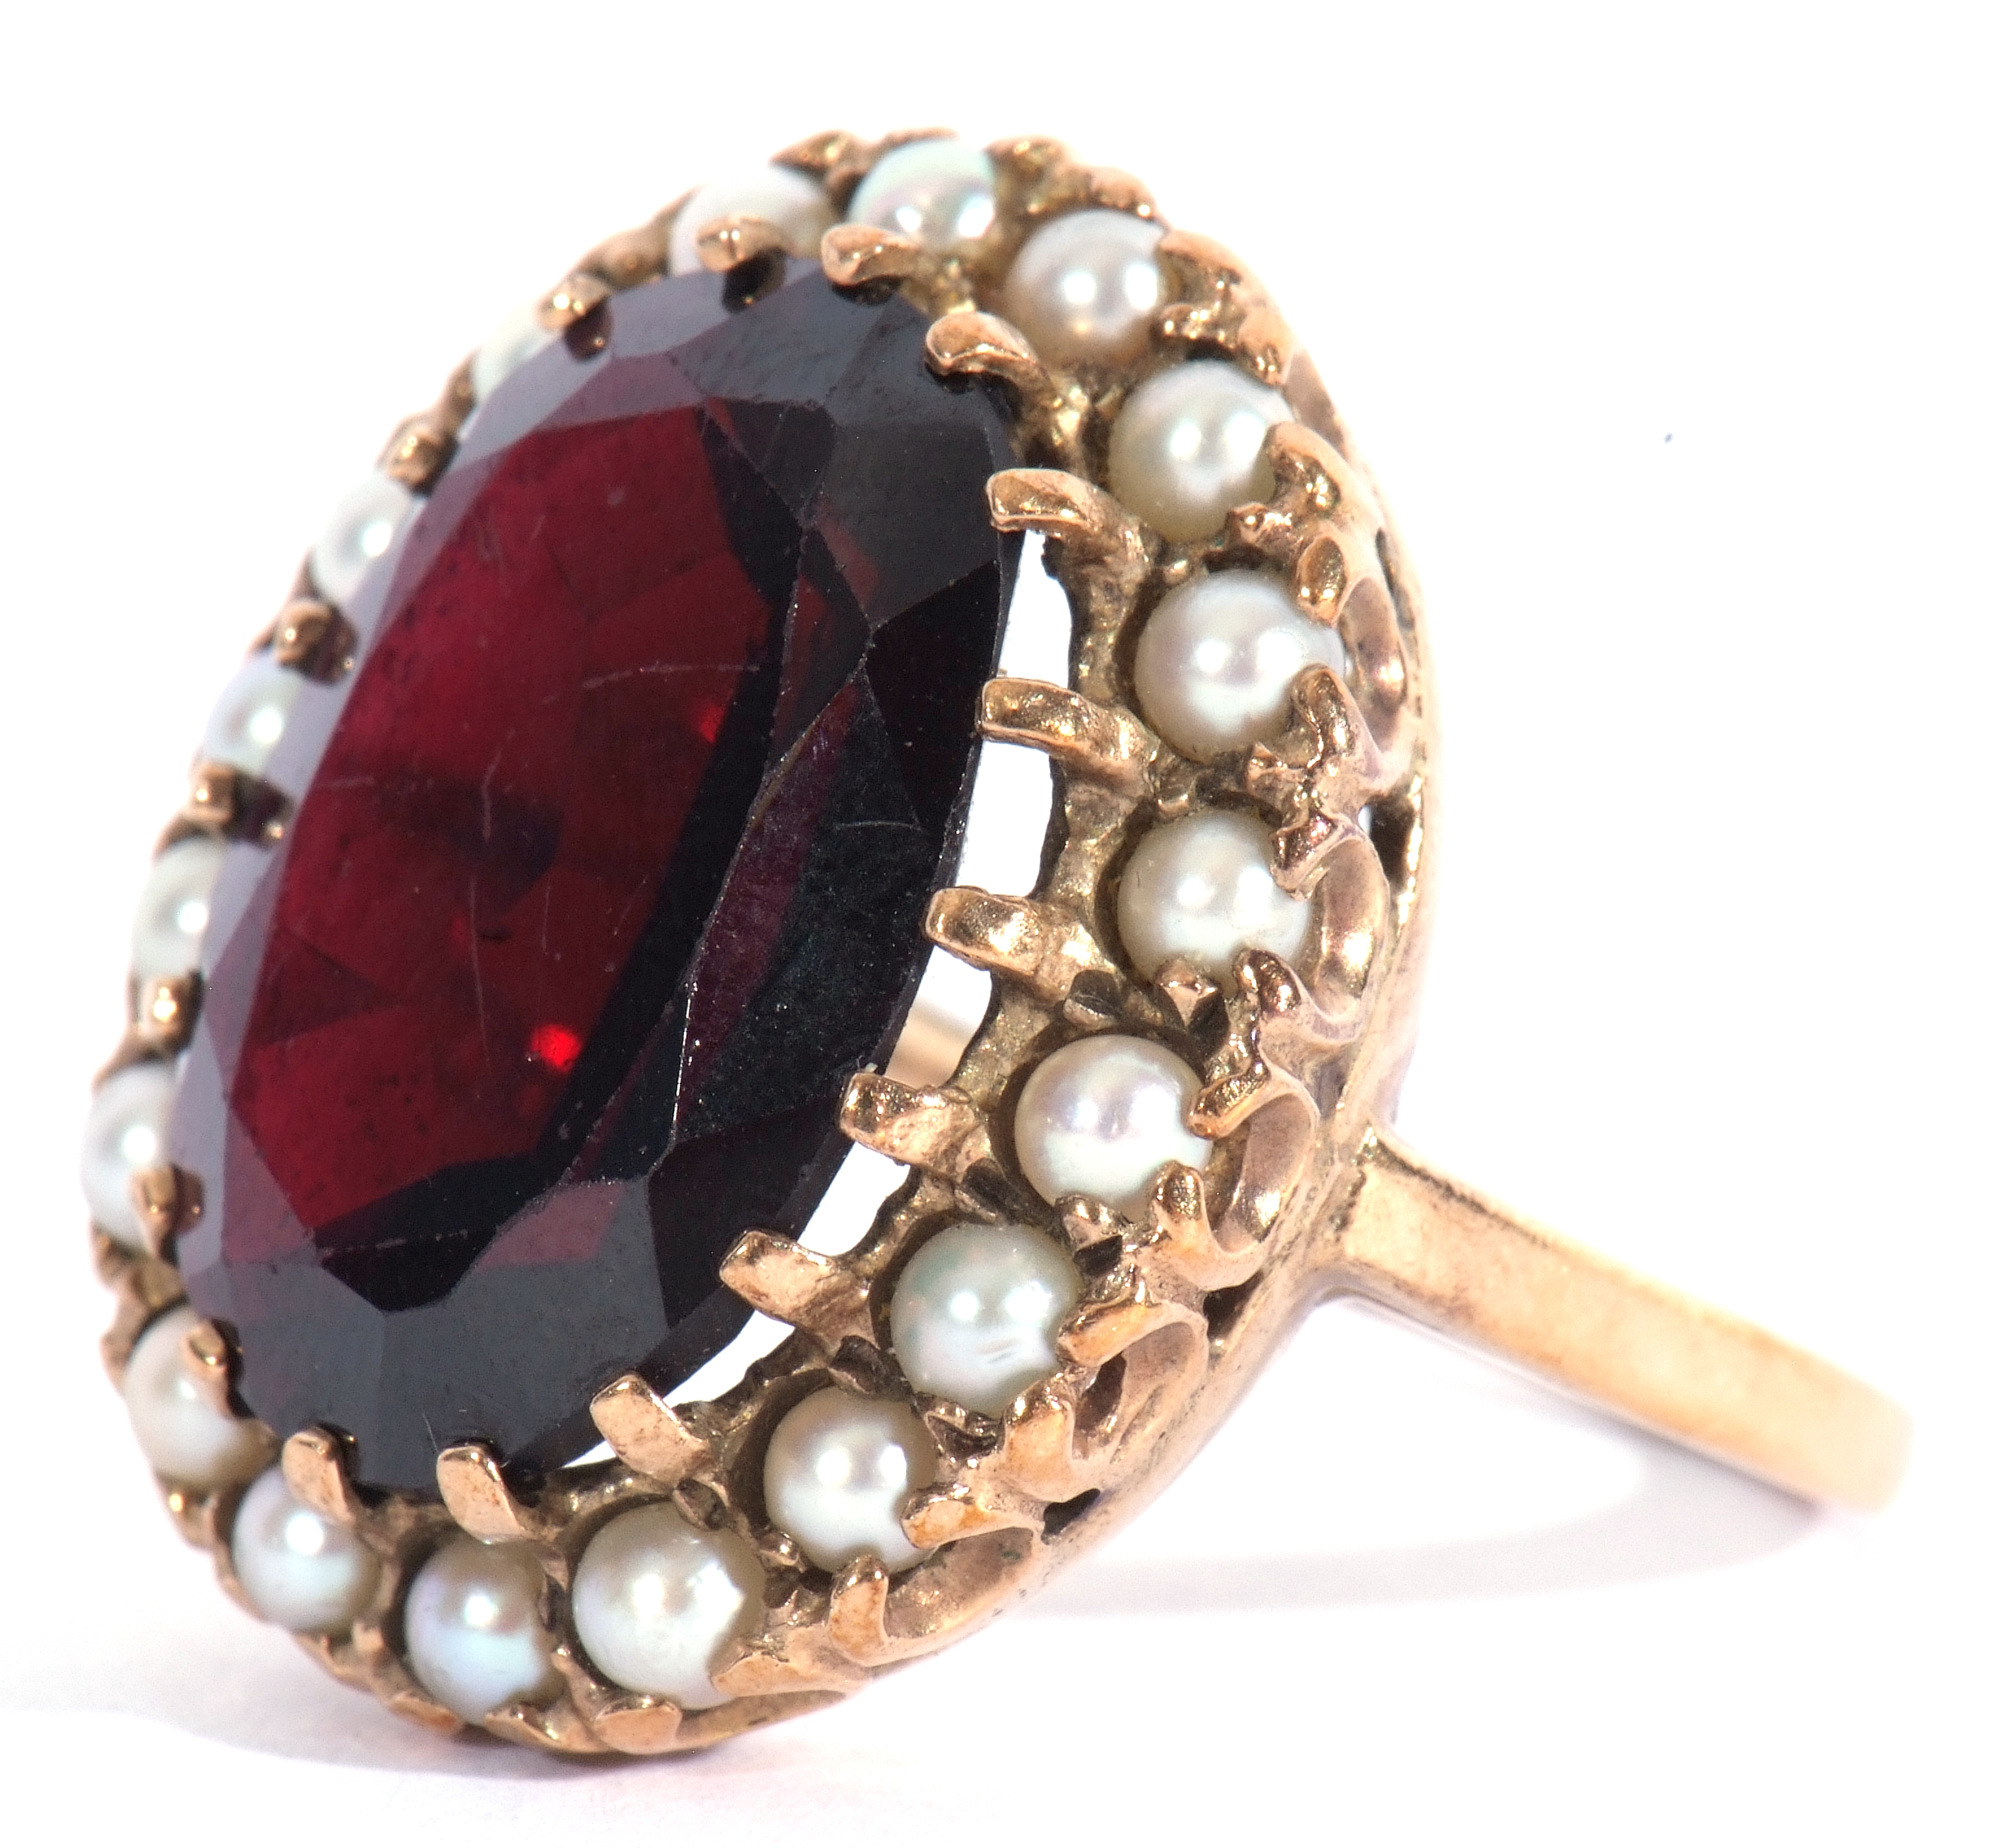 Modern 9ct gold dress ring, a large red paste faceted stone, 18 x 12mm, within a seed pearl - Image 3 of 9